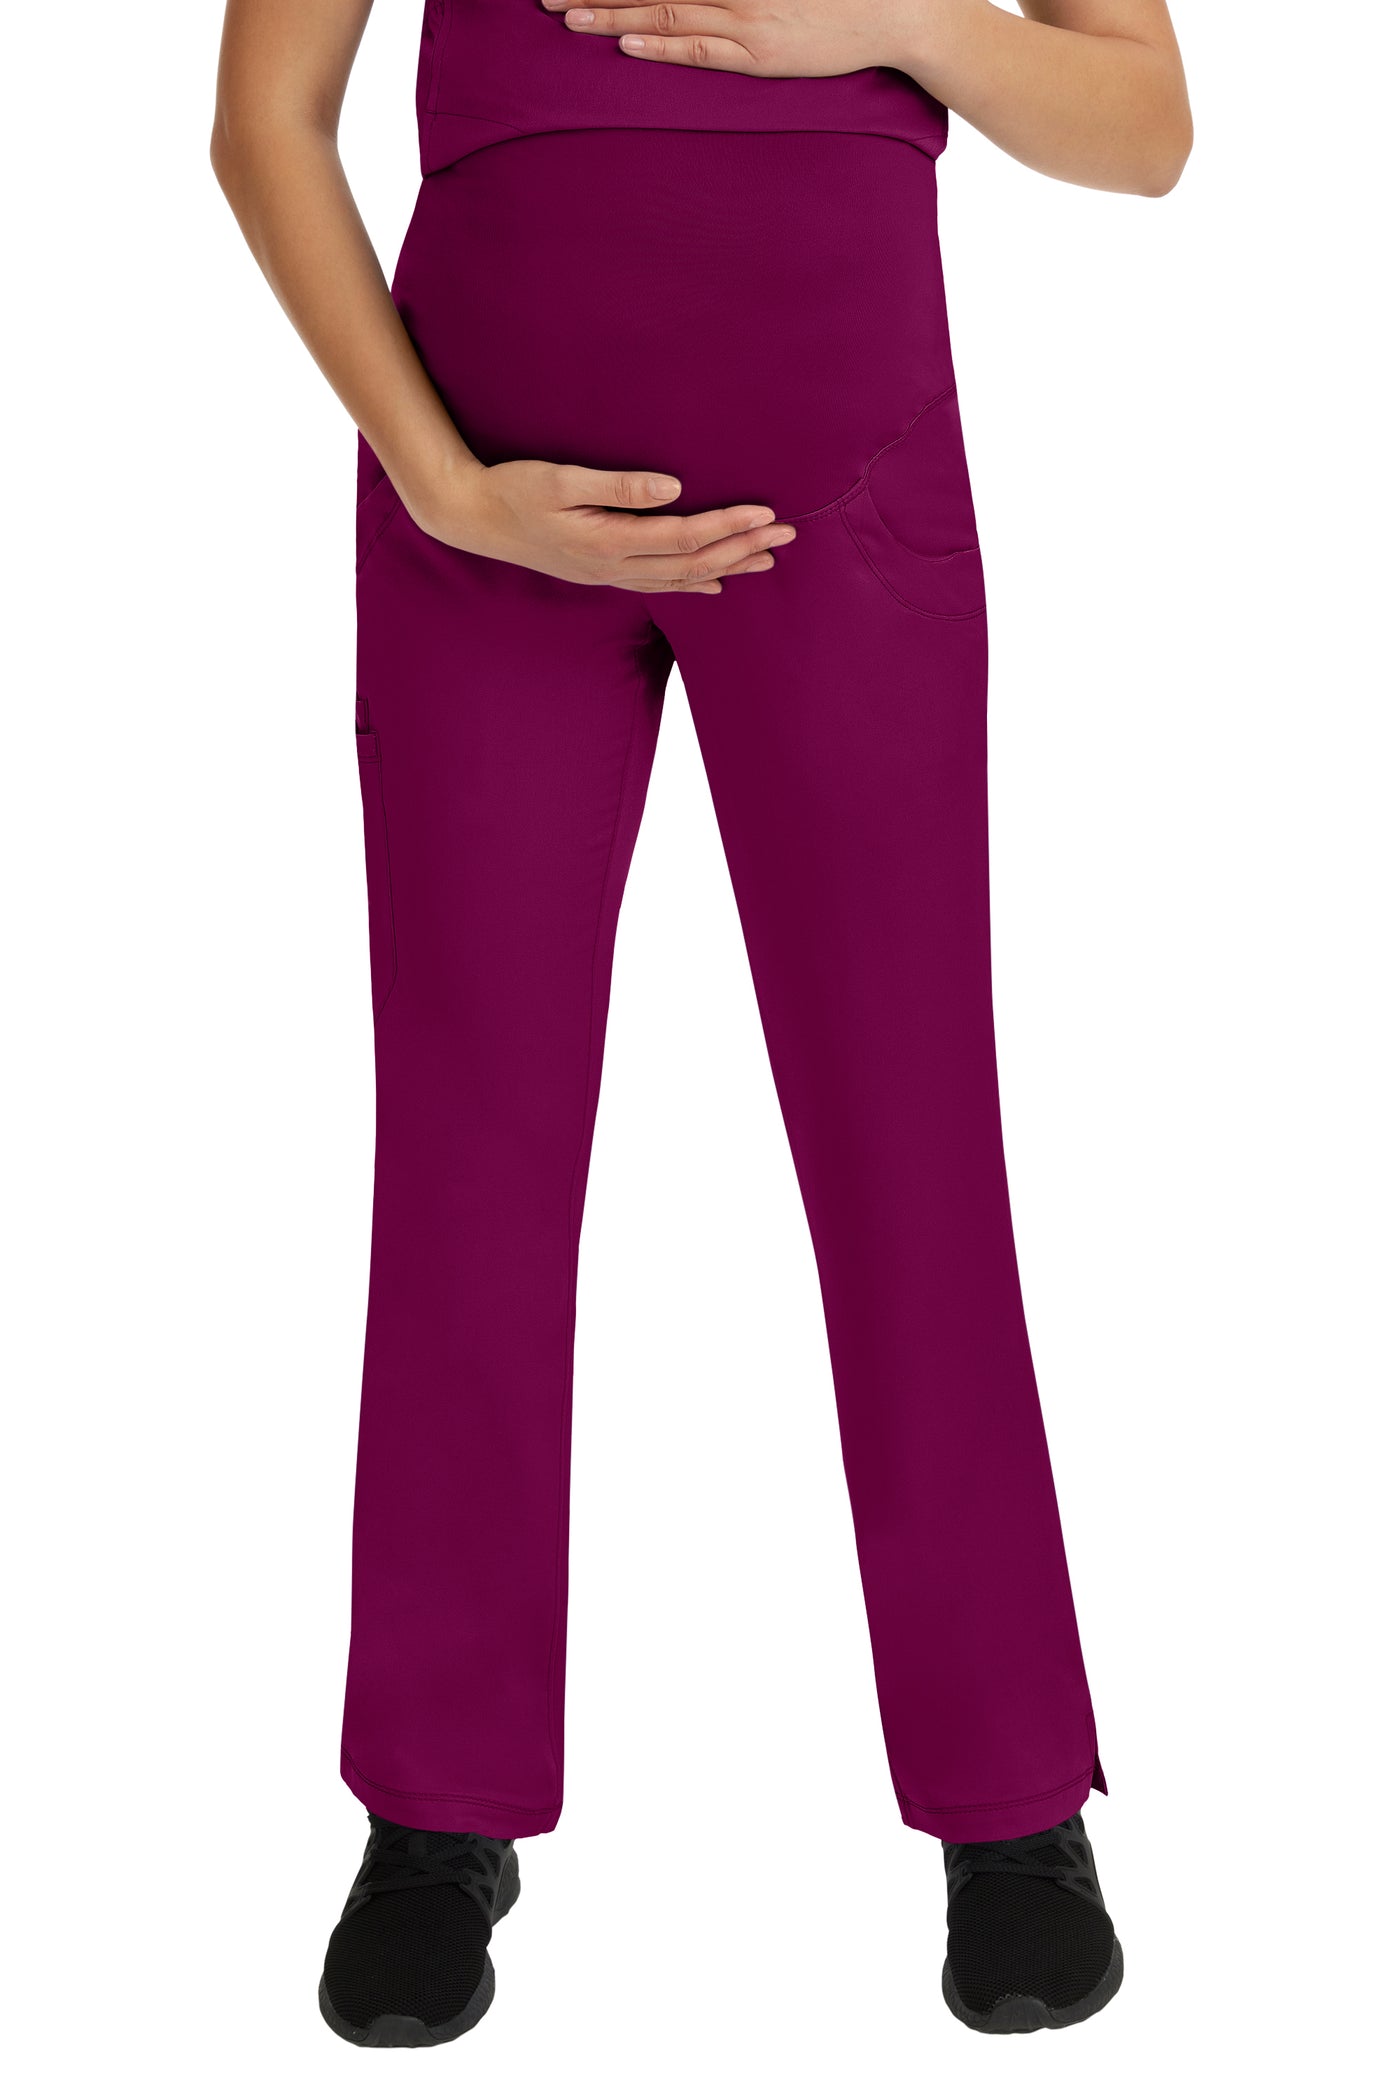 ROSE MATERNITY PANT by Healing Hands XXS-5XL/  WINE